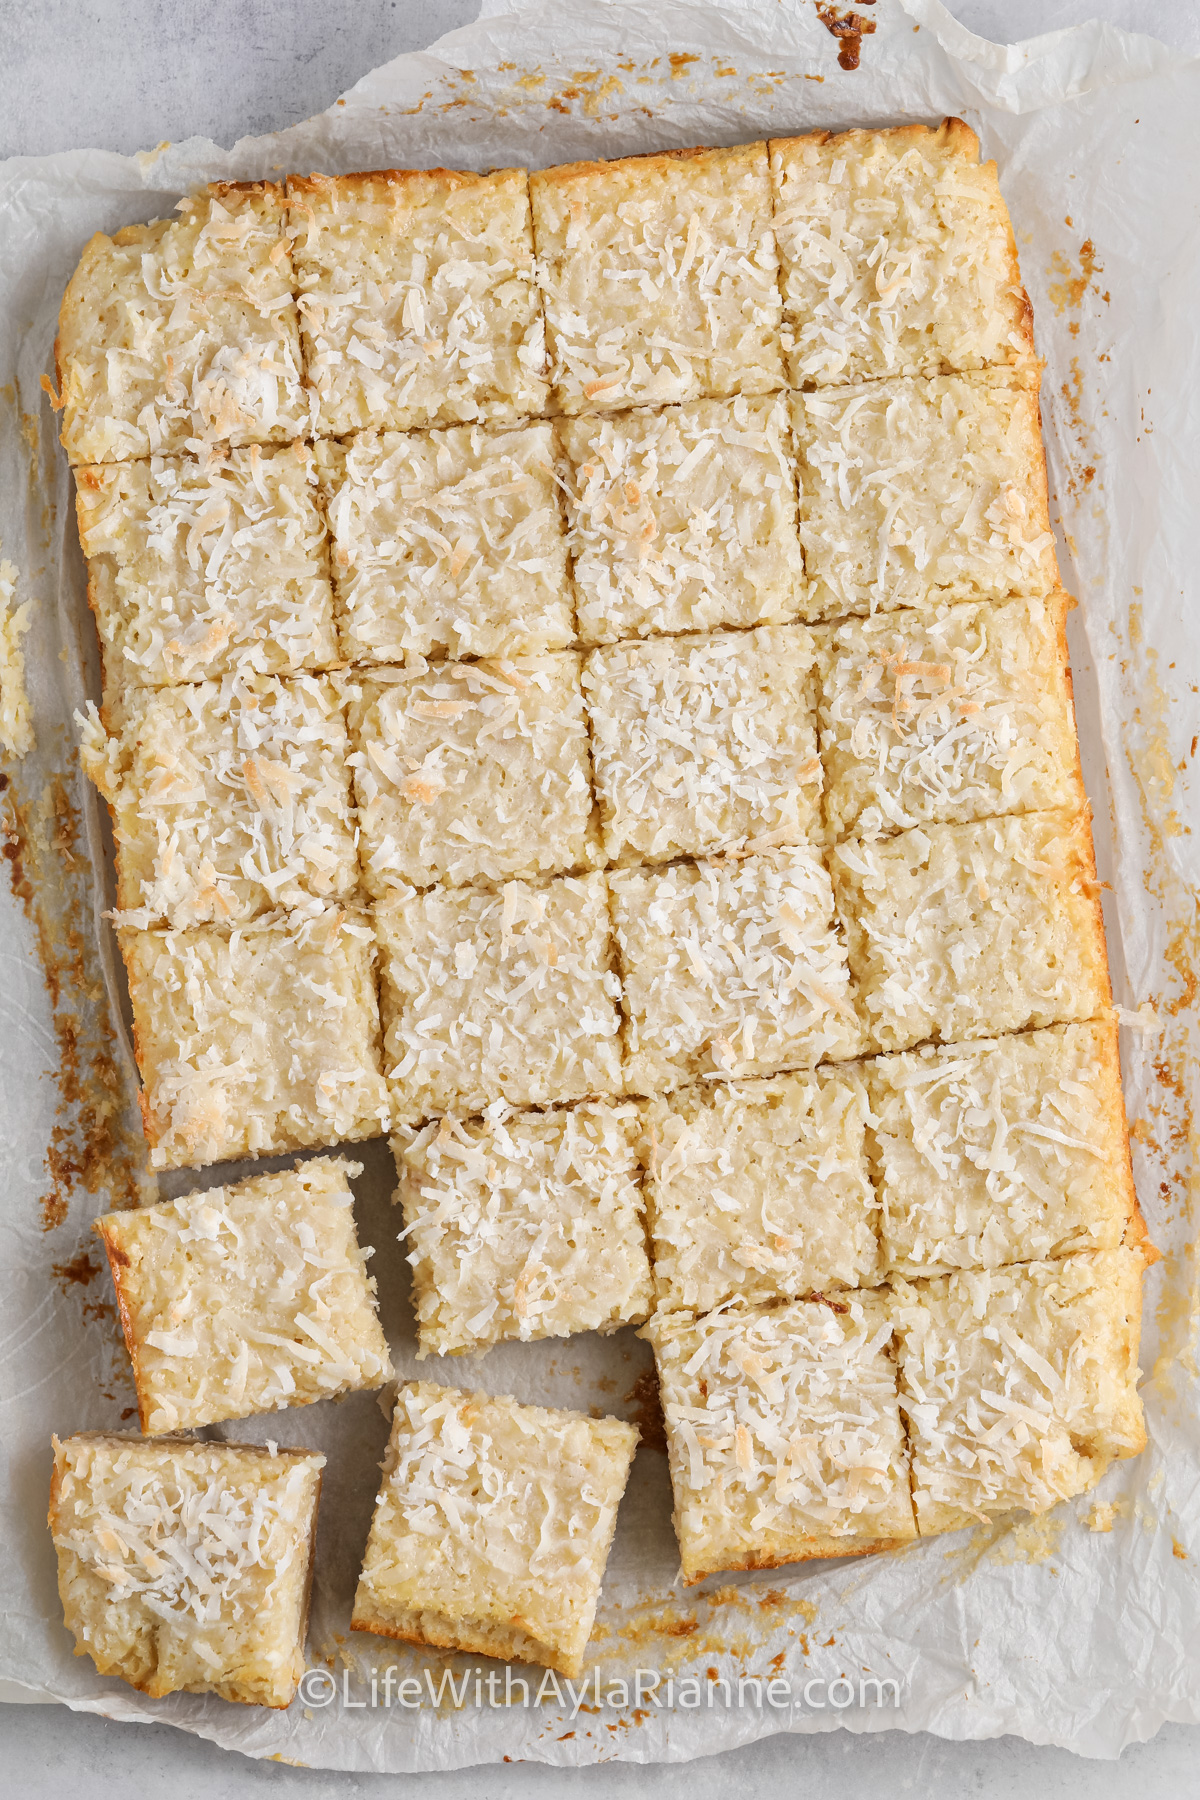 A pan of coconut bars sliced into squares